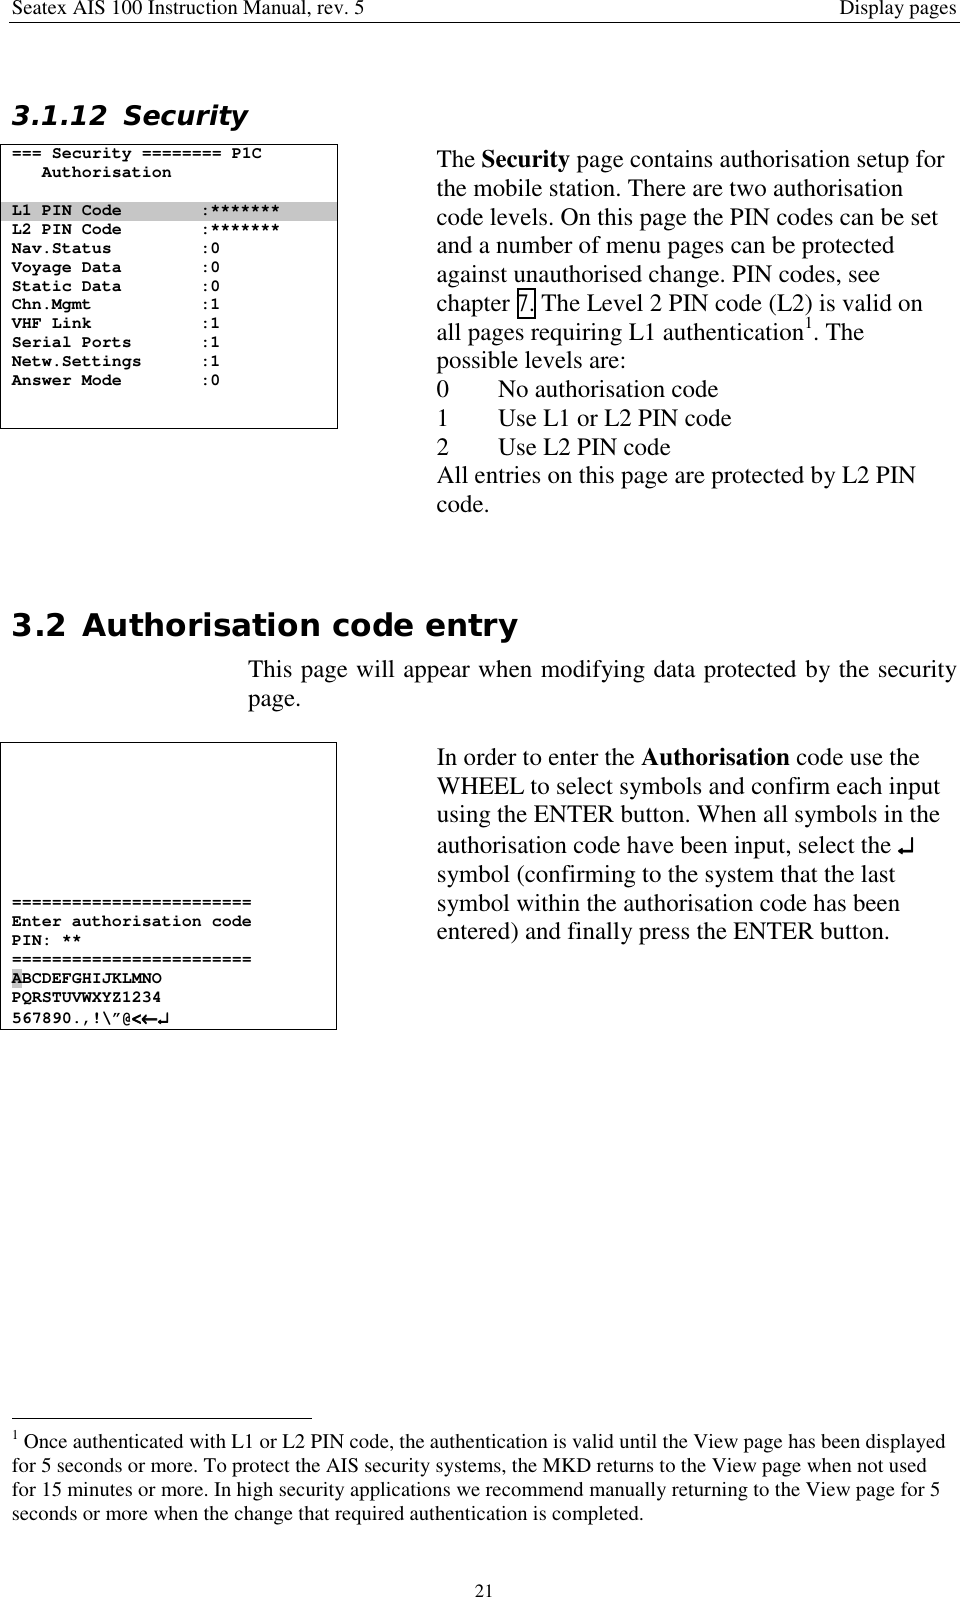 Seatex AIS 100 Instruction Manual, rev. 5 Display pages213.1.12 Security=== Security ======== P1CAuthorisationL1 PIN Code :*******L2 PIN Code :*******Nav.Status :0Voyage Data :0Static Data :0Chn.Mgmt :1VHF Link :1Serial Ports :1Netw.Settings :1Answer Mode :0The Security page contains authorisation setup forthe mobile station. There are two authorisationcode levels. On this page the PIN codes can be setand a number of menu pages can be protectedagainst unauthorised change. PIN codes, seechapter 7. The Level 2 PIN code (L2) is valid onall pages requiring L1 authentication1. Thepossible levels are:0 No authorisation code1 Use L1 or L2 PIN code2 Use L2 PIN codeAll entries on this page are protected by L2 PINcode.3.2 Authorisation code entryThis page will appear when modifying data protected by the securitypage.========================Enter authorisation codePIN: **========================ABCDEFGHIJKLMNOPQRSTUVWXYZ1234567890.,!\”@&lt;&lt;&lt;&lt;←←←←↵↵↵↵In order to enter the Authorisation code use theWHEEL to select symbols and confirm each inputusing the ENTER button. When all symbols in theauthorisation code have been input, select the ↵↵↵↵symbol (confirming to the system that the lastsymbol within the authorisation code has beenentered) and finally press the ENTER button.                                                1 Once authenticated with L1 or L2 PIN code, the authentication is valid until the View page has been displayedfor 5 seconds or more. To protect the AIS security systems, the MKD returns to the View page when not usedfor 15 minutes or more. In high security applications we recommend manually returning to the View page for 5seconds or more when the change that required authentication is completed.